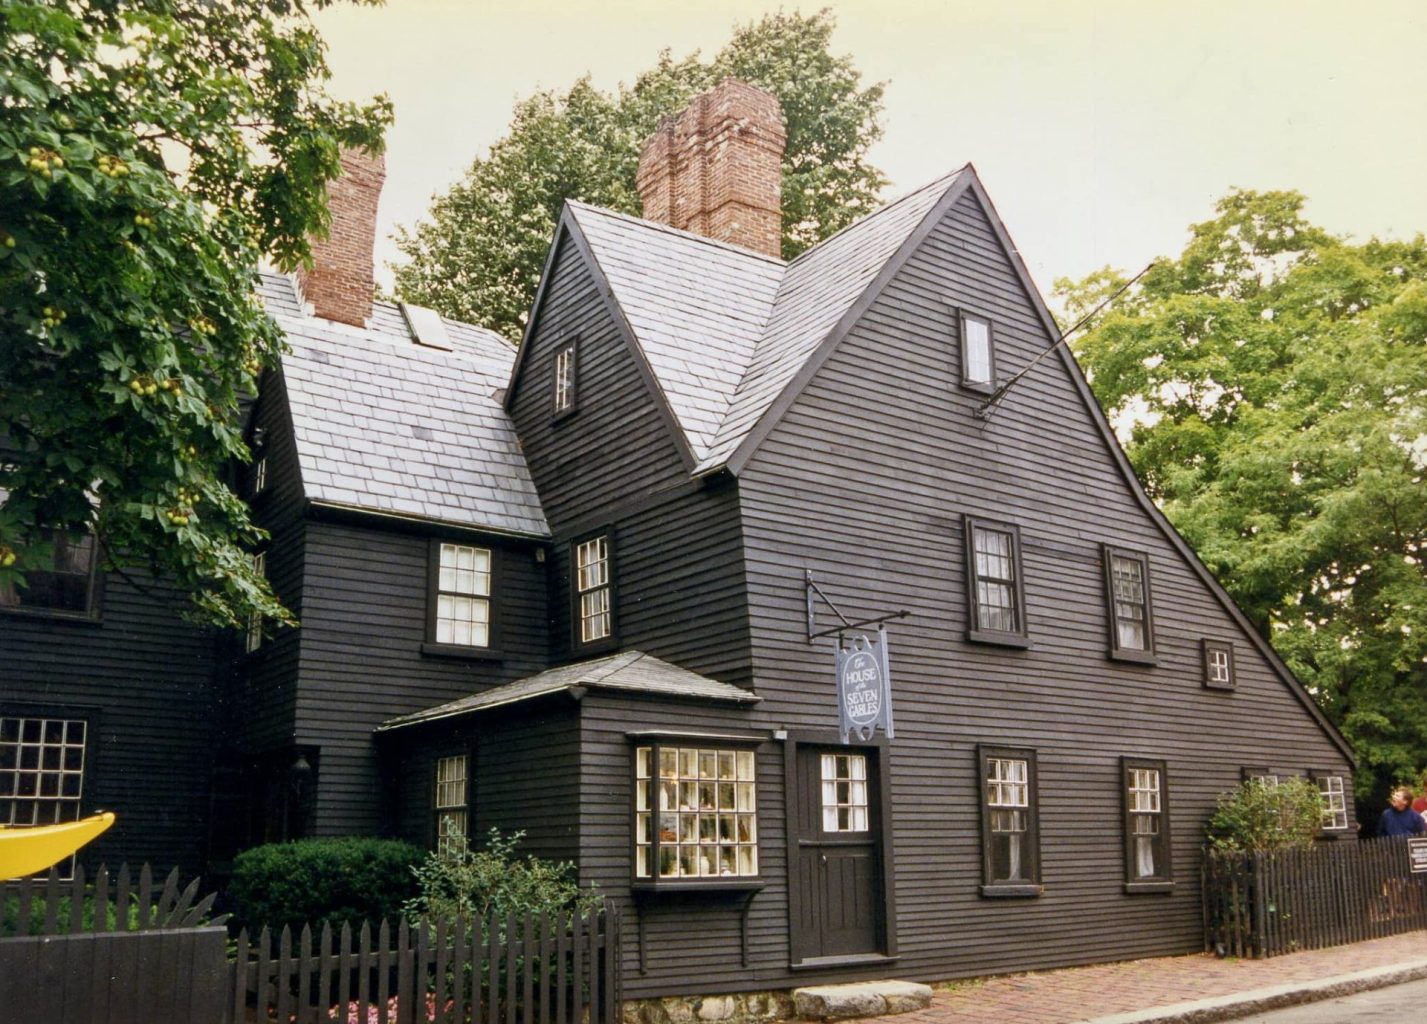 House of the Seven Gables. A black house with two chimneys and a pitched roof